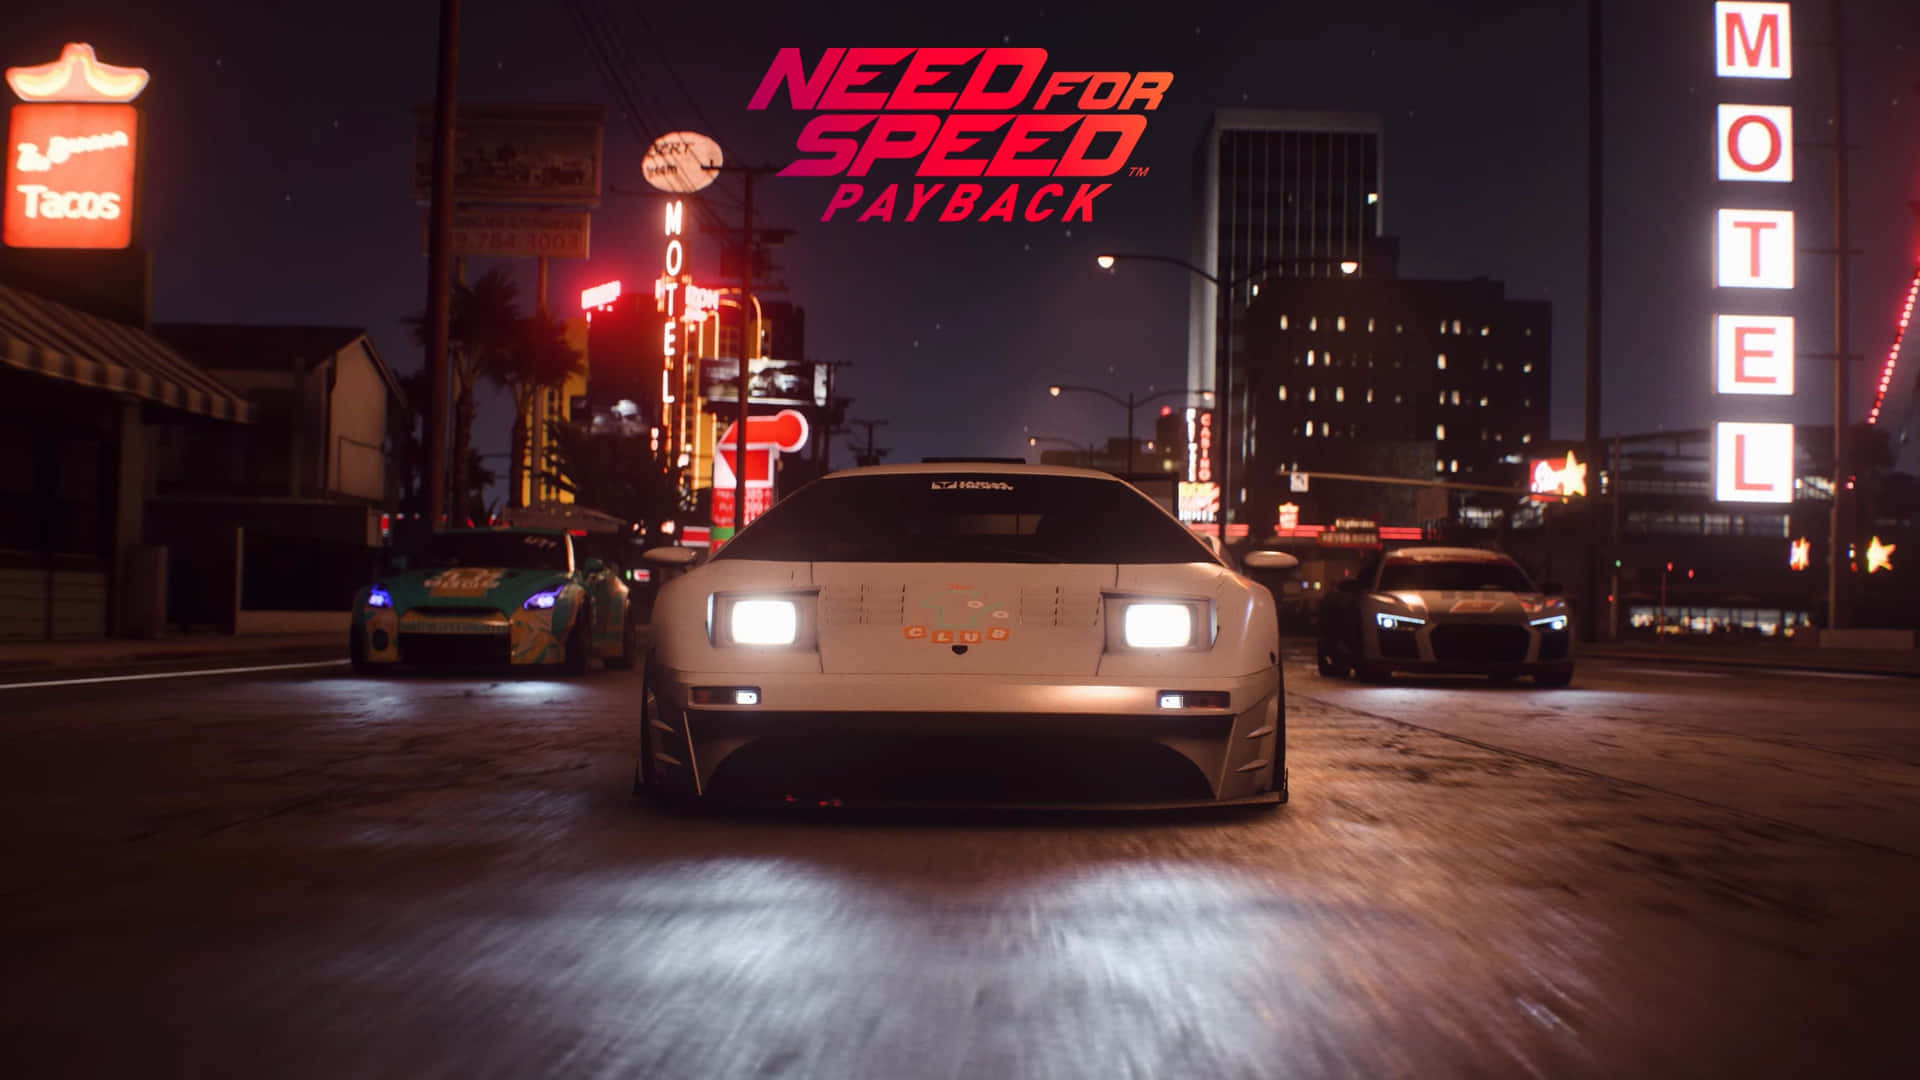 Need For Speed Payback Video Game Poster 4k Wallpaper